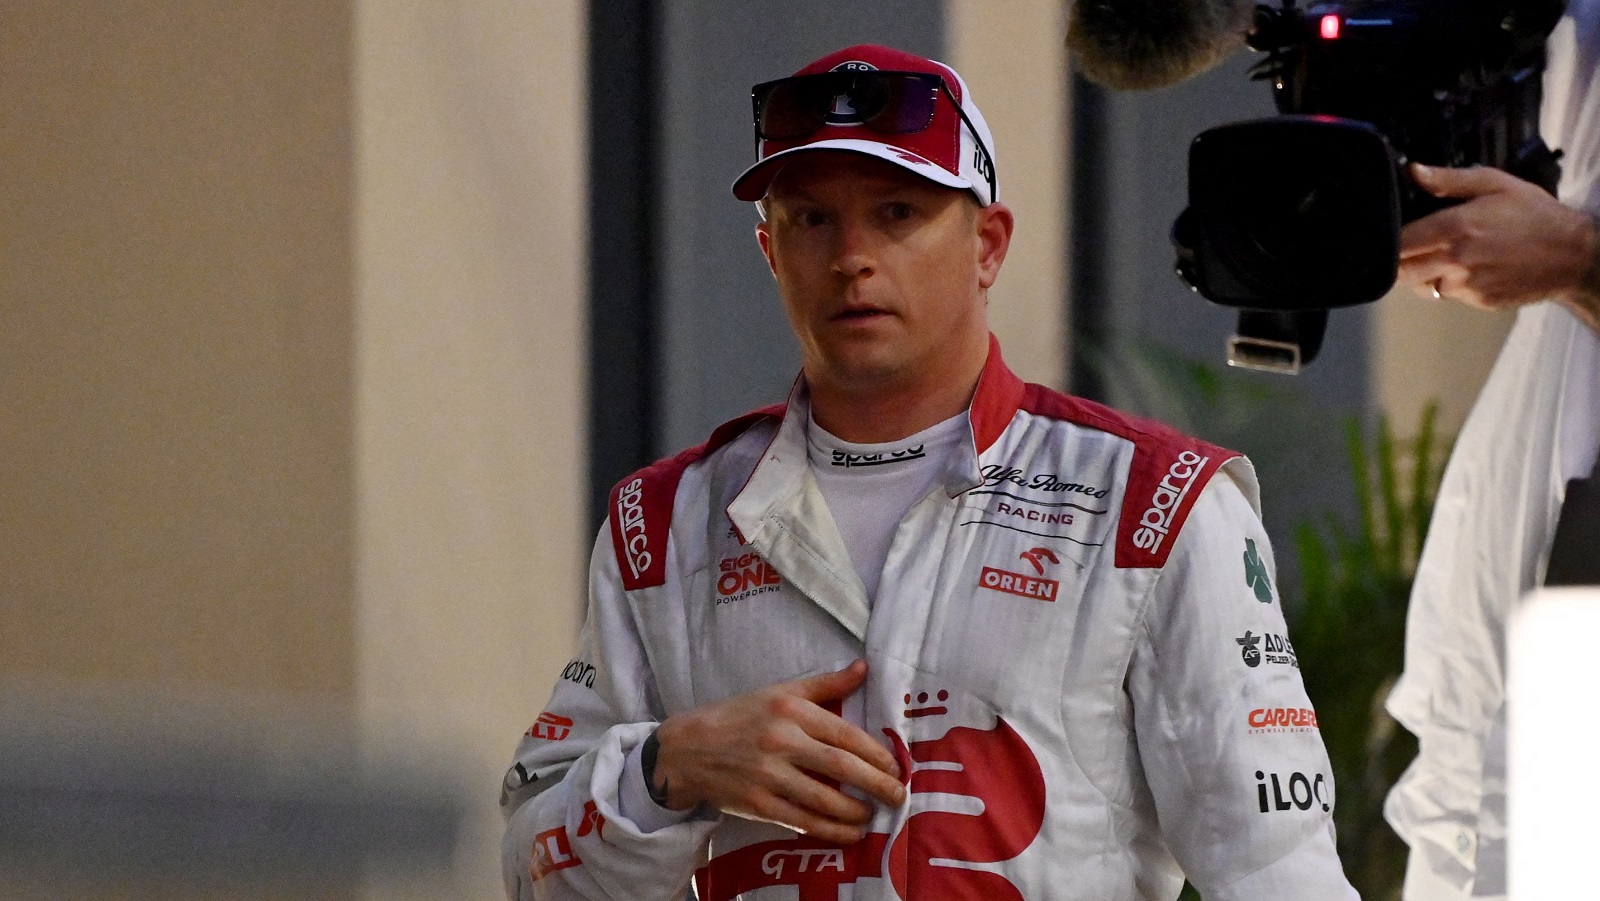 Finnish driver Kimi Raikkonen walks back in his team's hospitality area after he retired from the race at the Yas Marina Circuit during the Abu Dhabi Formula 1 Grand Prix on Dec. 12, 2021.